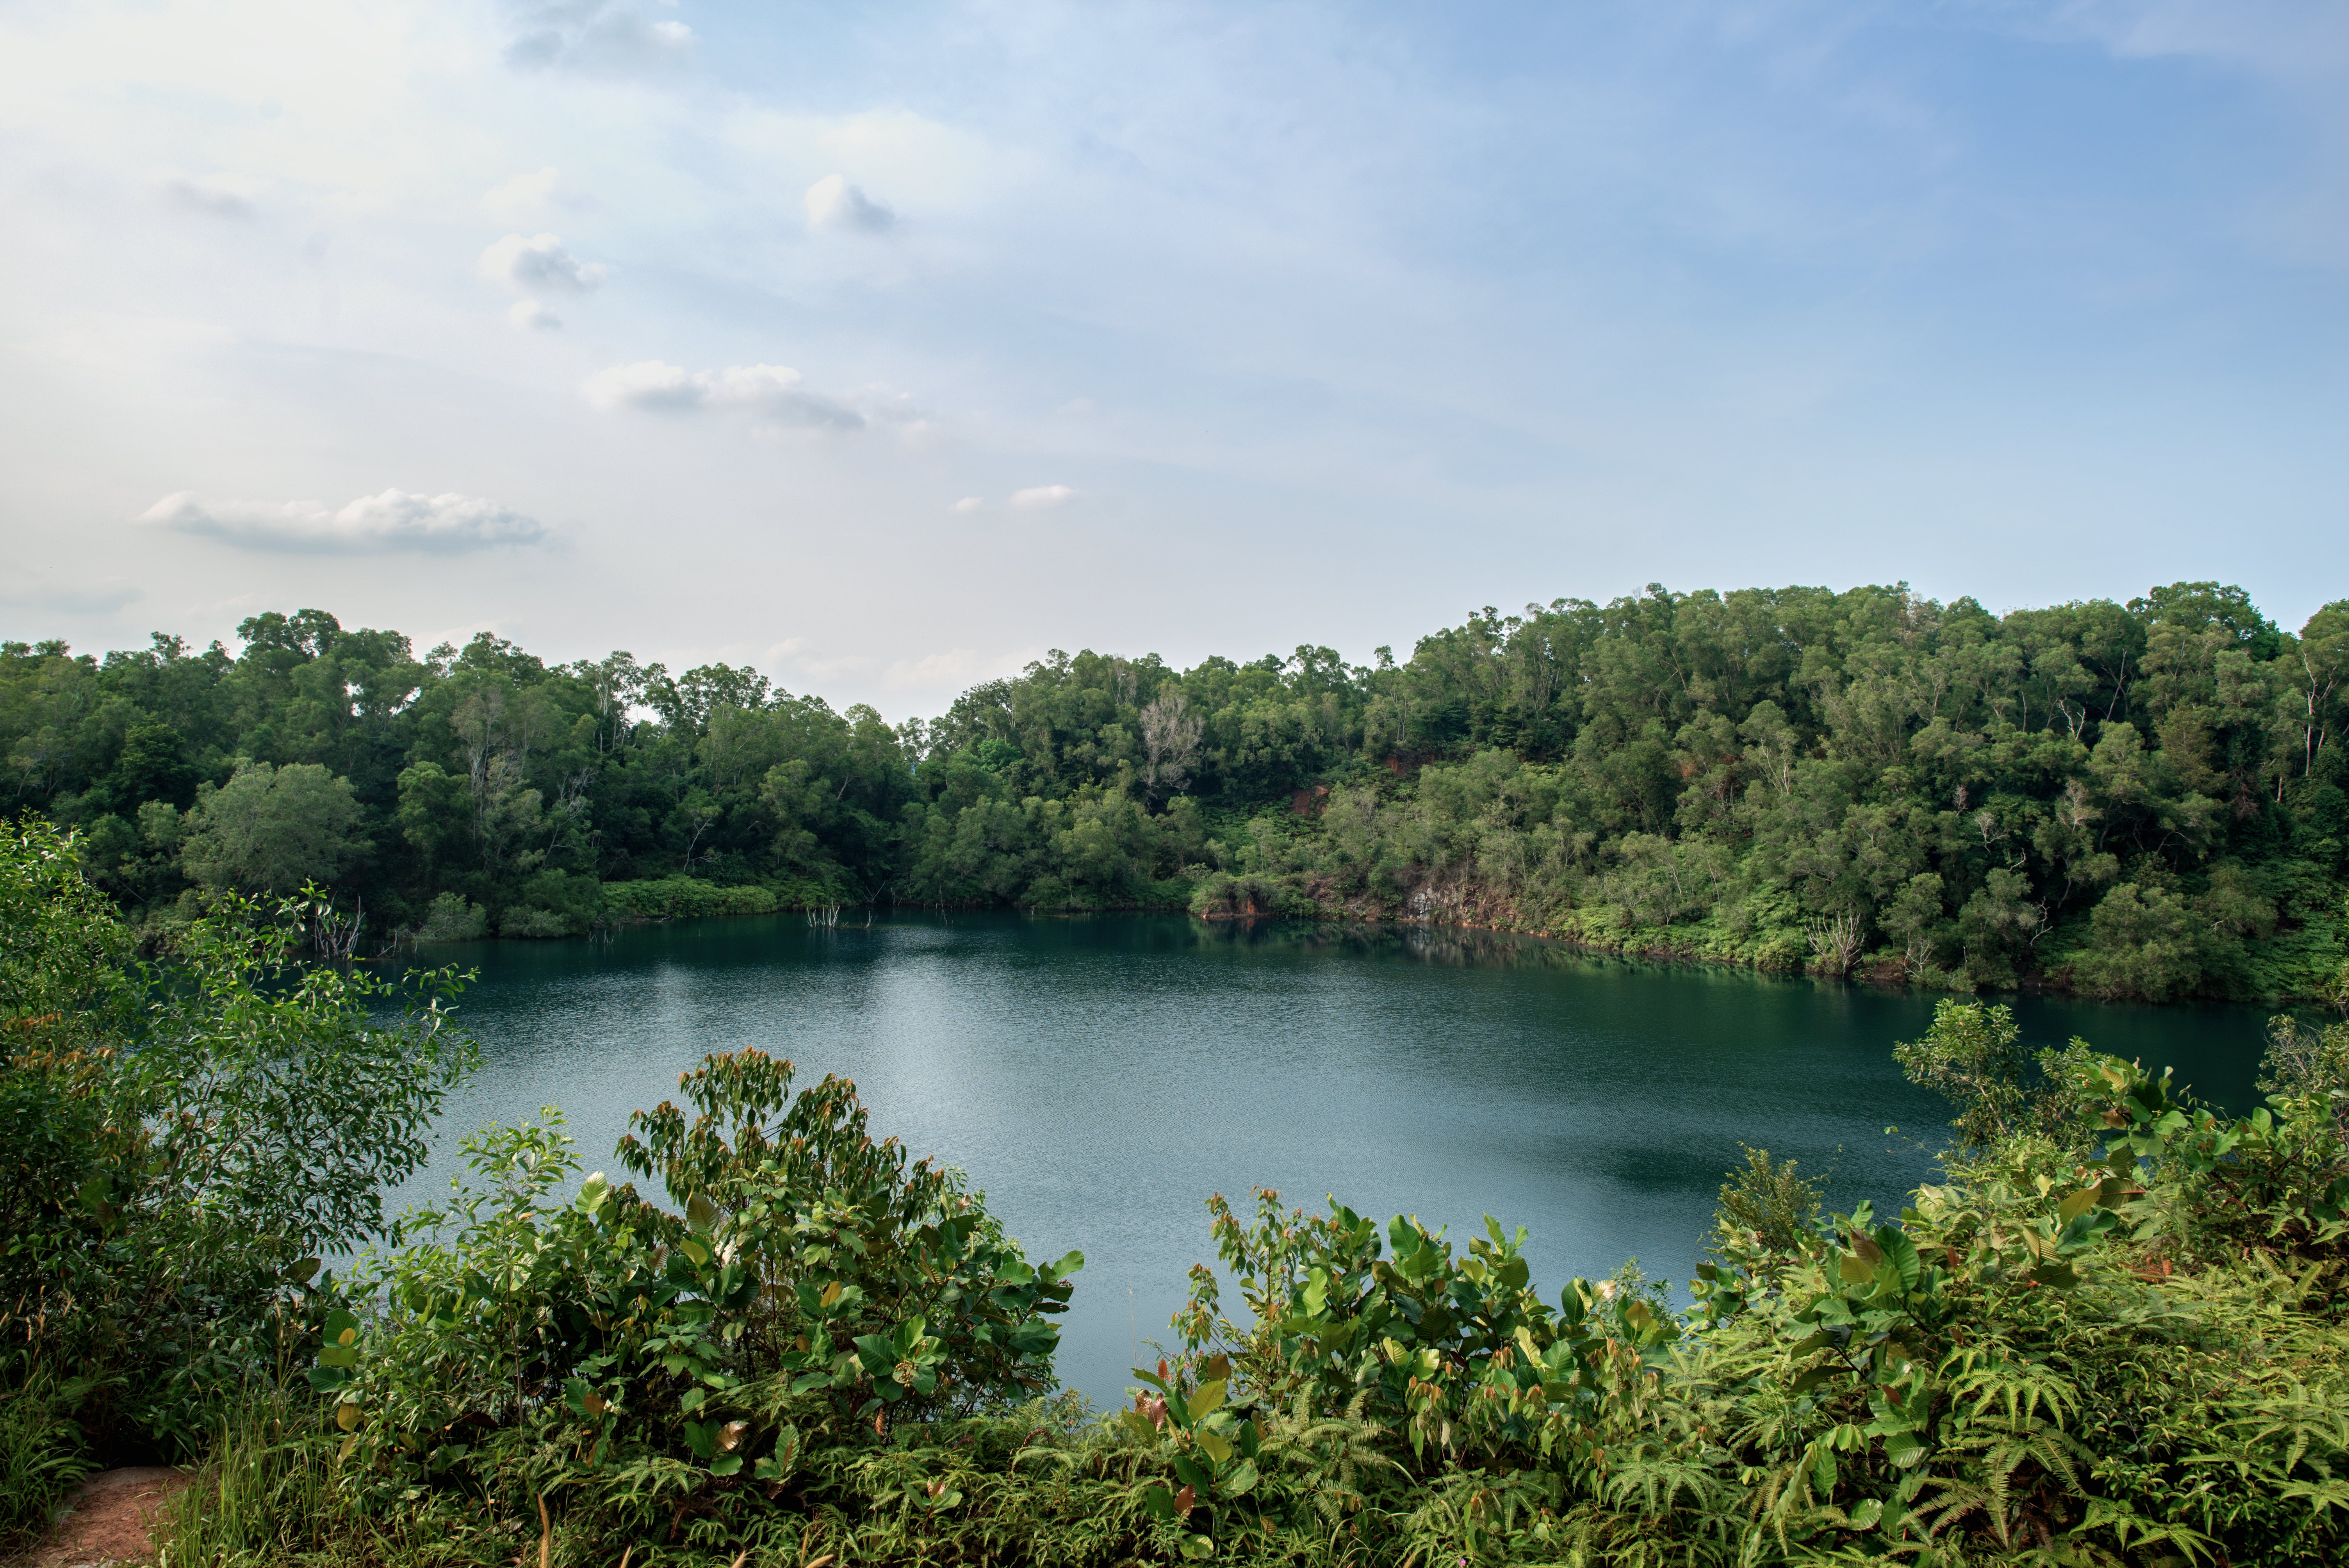 In Pulau Ubin you can enjoy lush surroundings and explore Singapore’s last traditional kampong